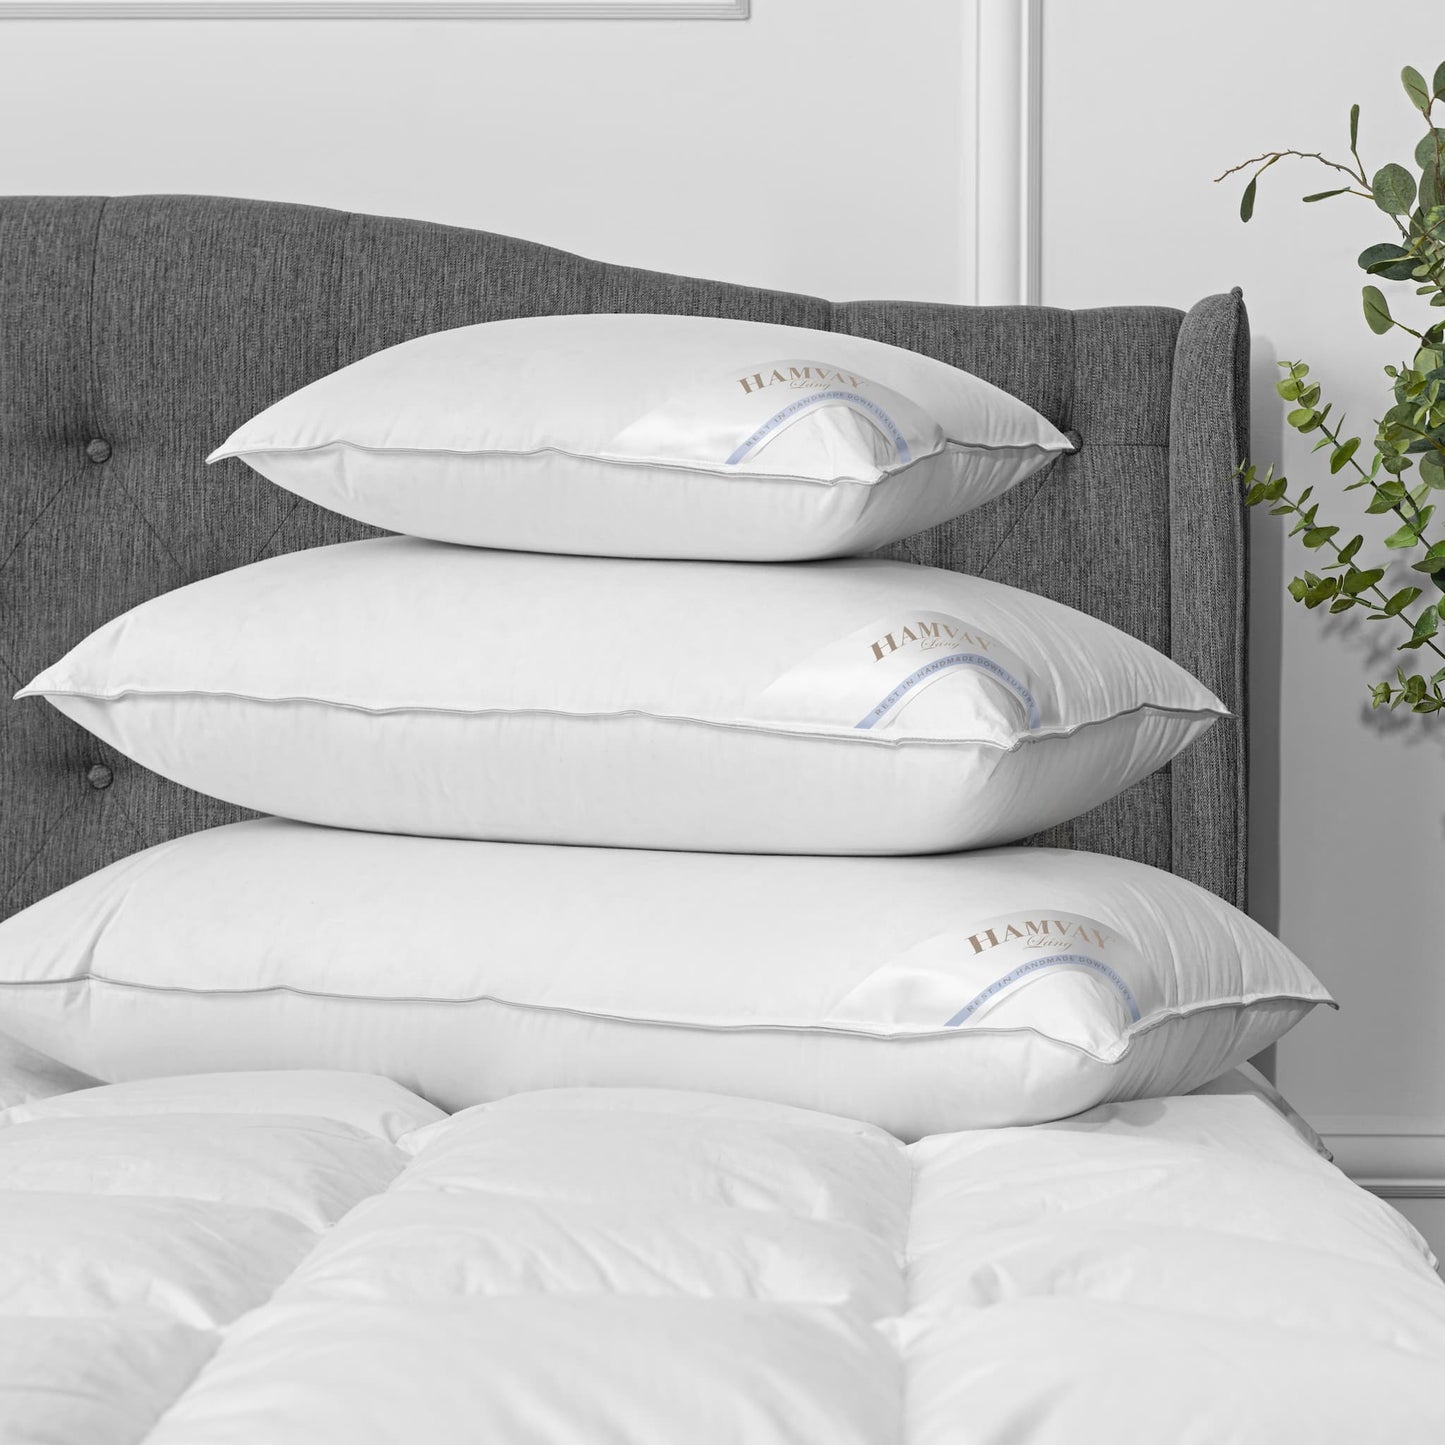 PureComfort Hungarian goose down pillows on top of each other